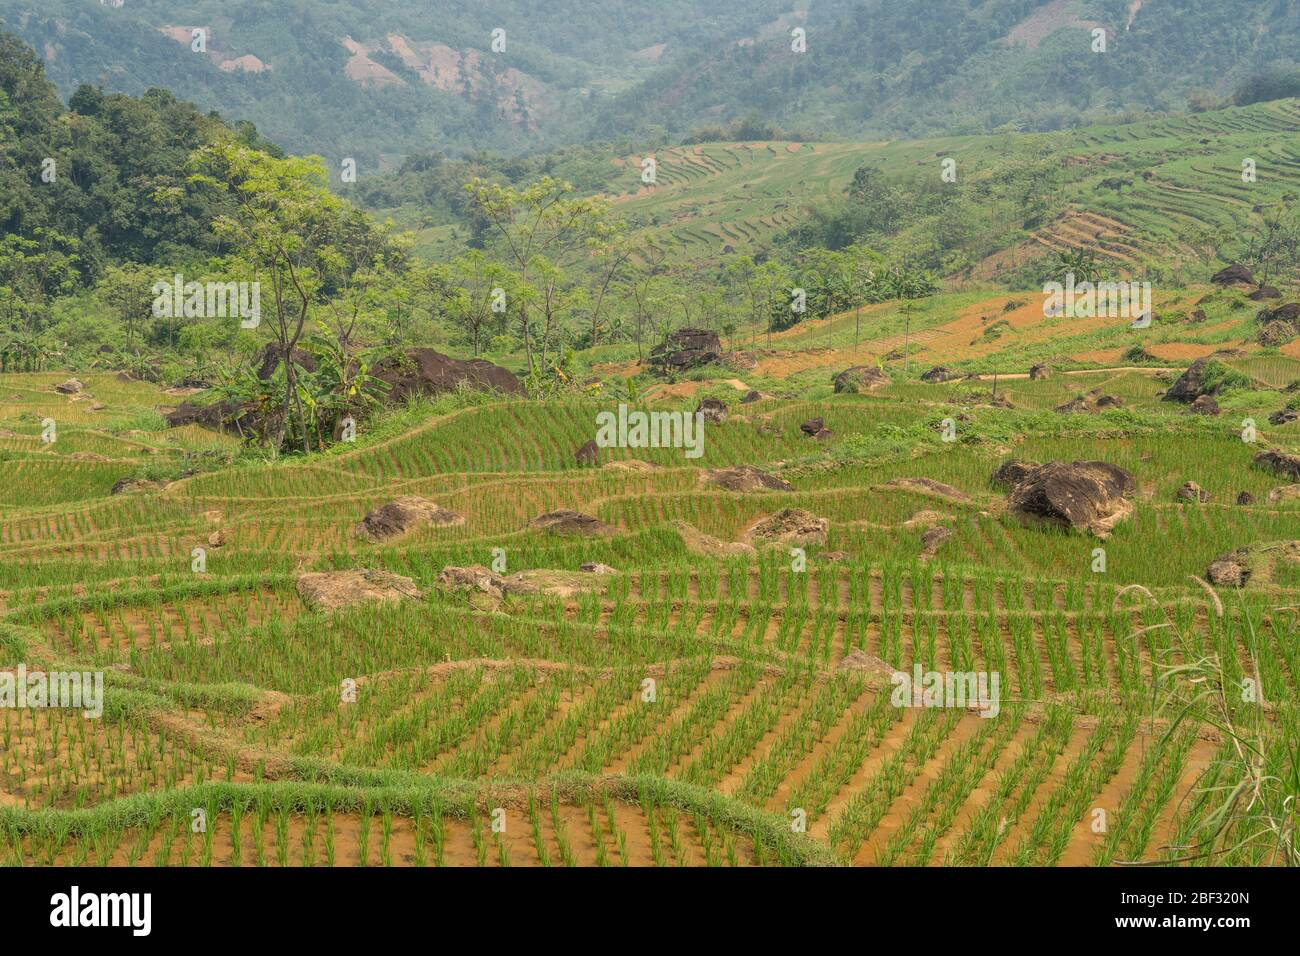 Newly planted rice terraces at Pu Luong Nature Reserve, Vietnam Stock Photo